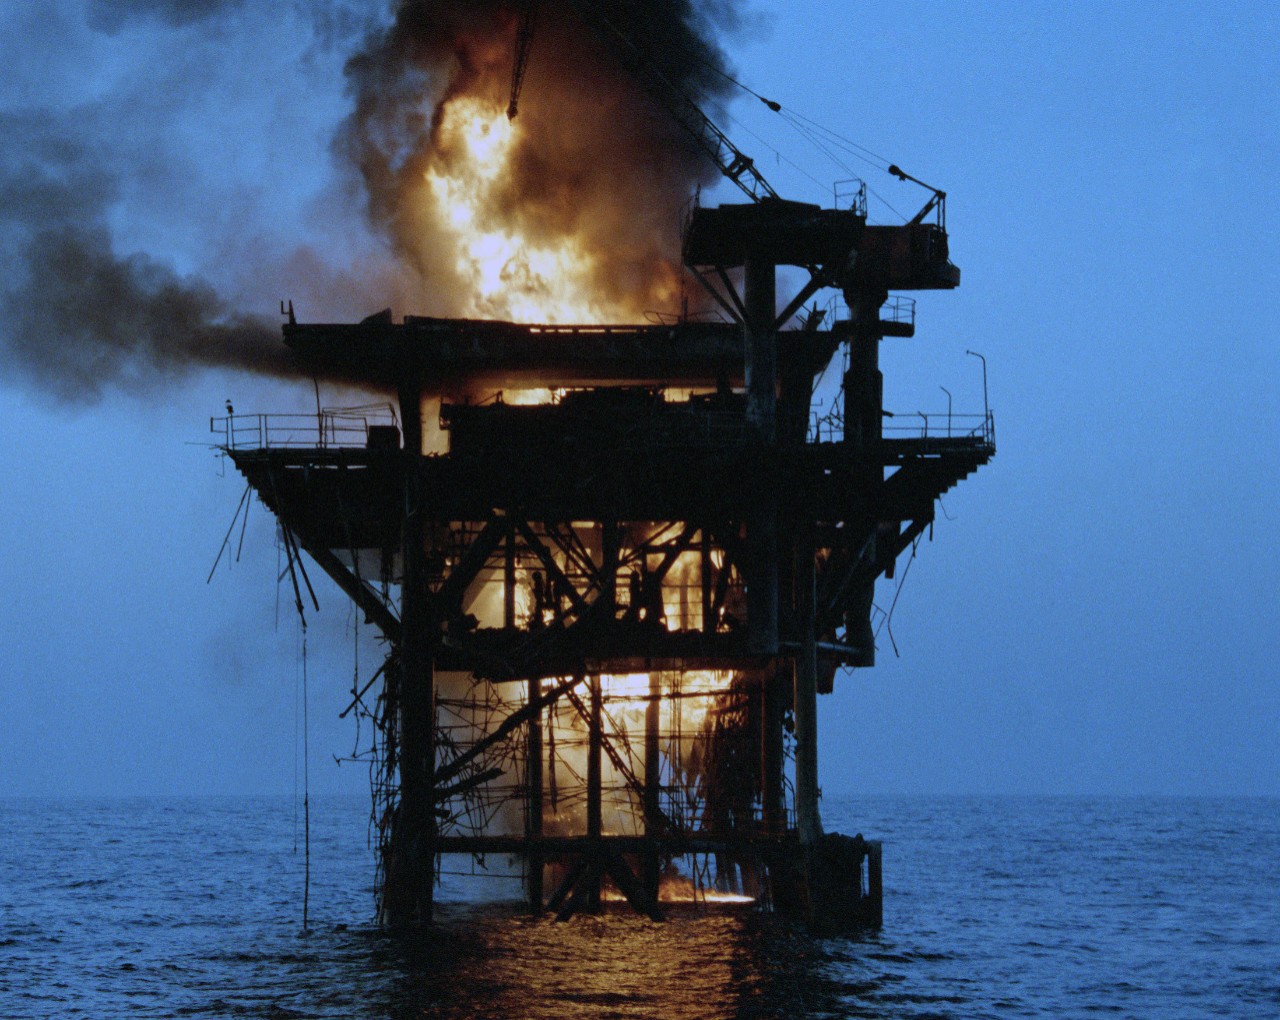 The “Ayatollah’s Eternal Flame” shortly after being ignited, 19 October 1987. (U.S. Navy Photo by PH3 Henry Cleveland, DIMOC #DN-SC-88-01042)  